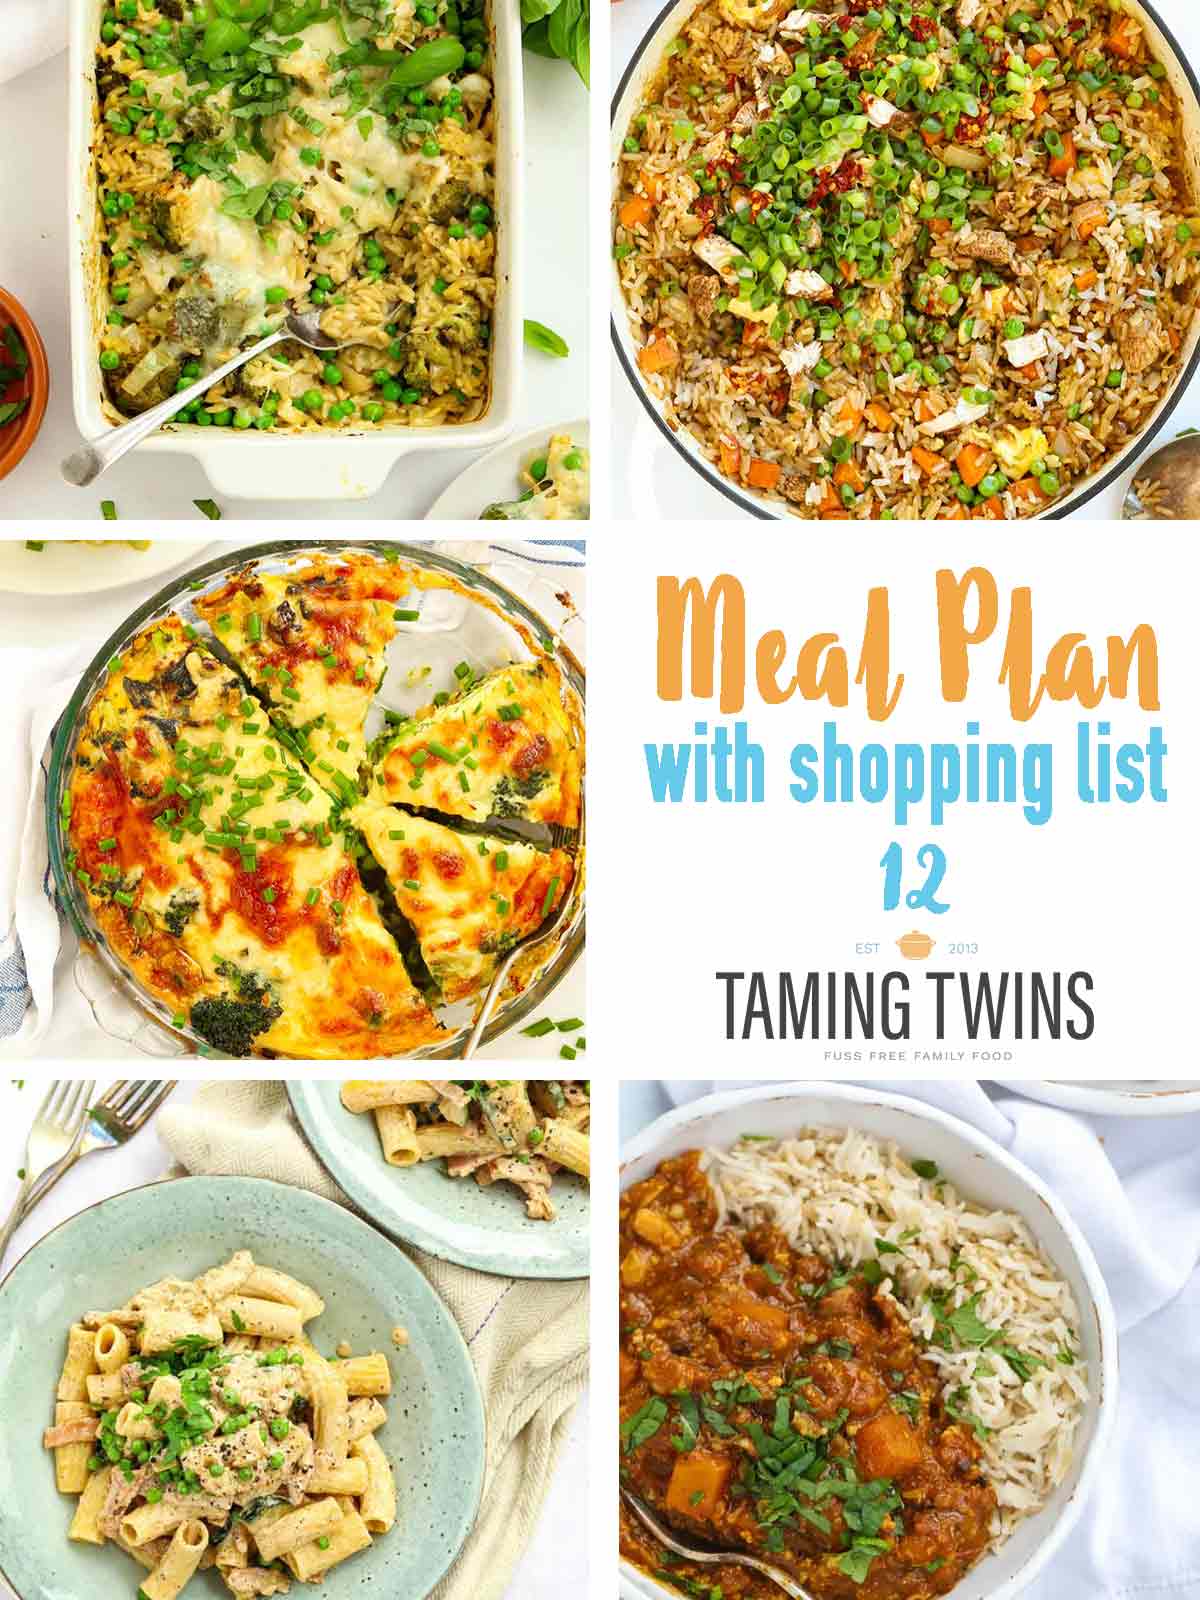 Meal plan 12 cover featuring student recipes.